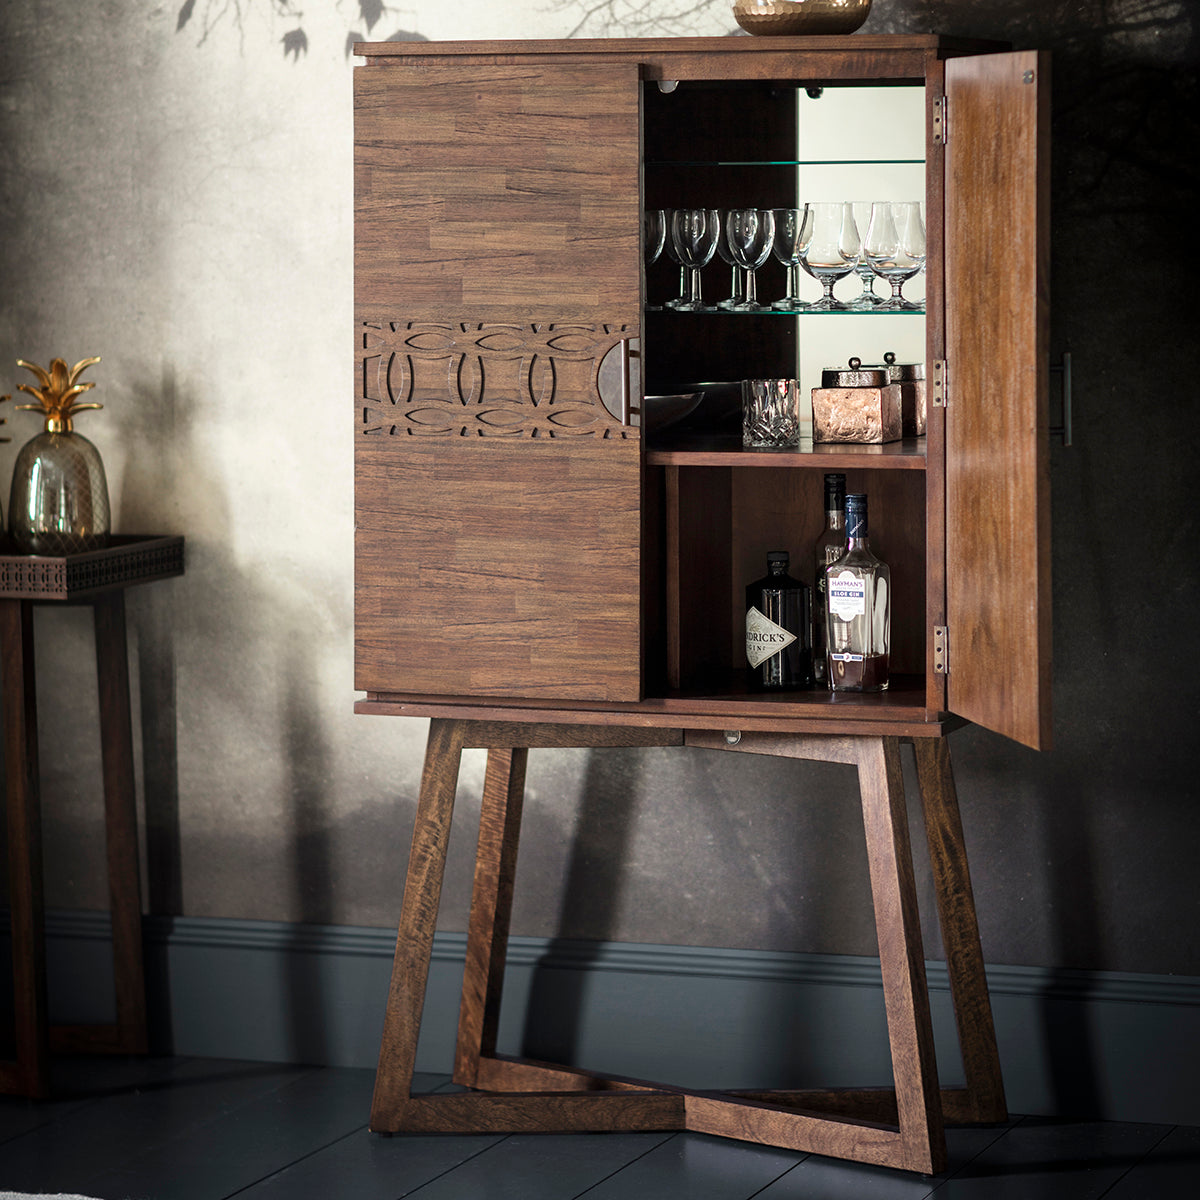 A Dartington Retreat Cocktail Cabinet 850x400x1570mm by Kikiathome.co.uk serving as interior decor in a room.